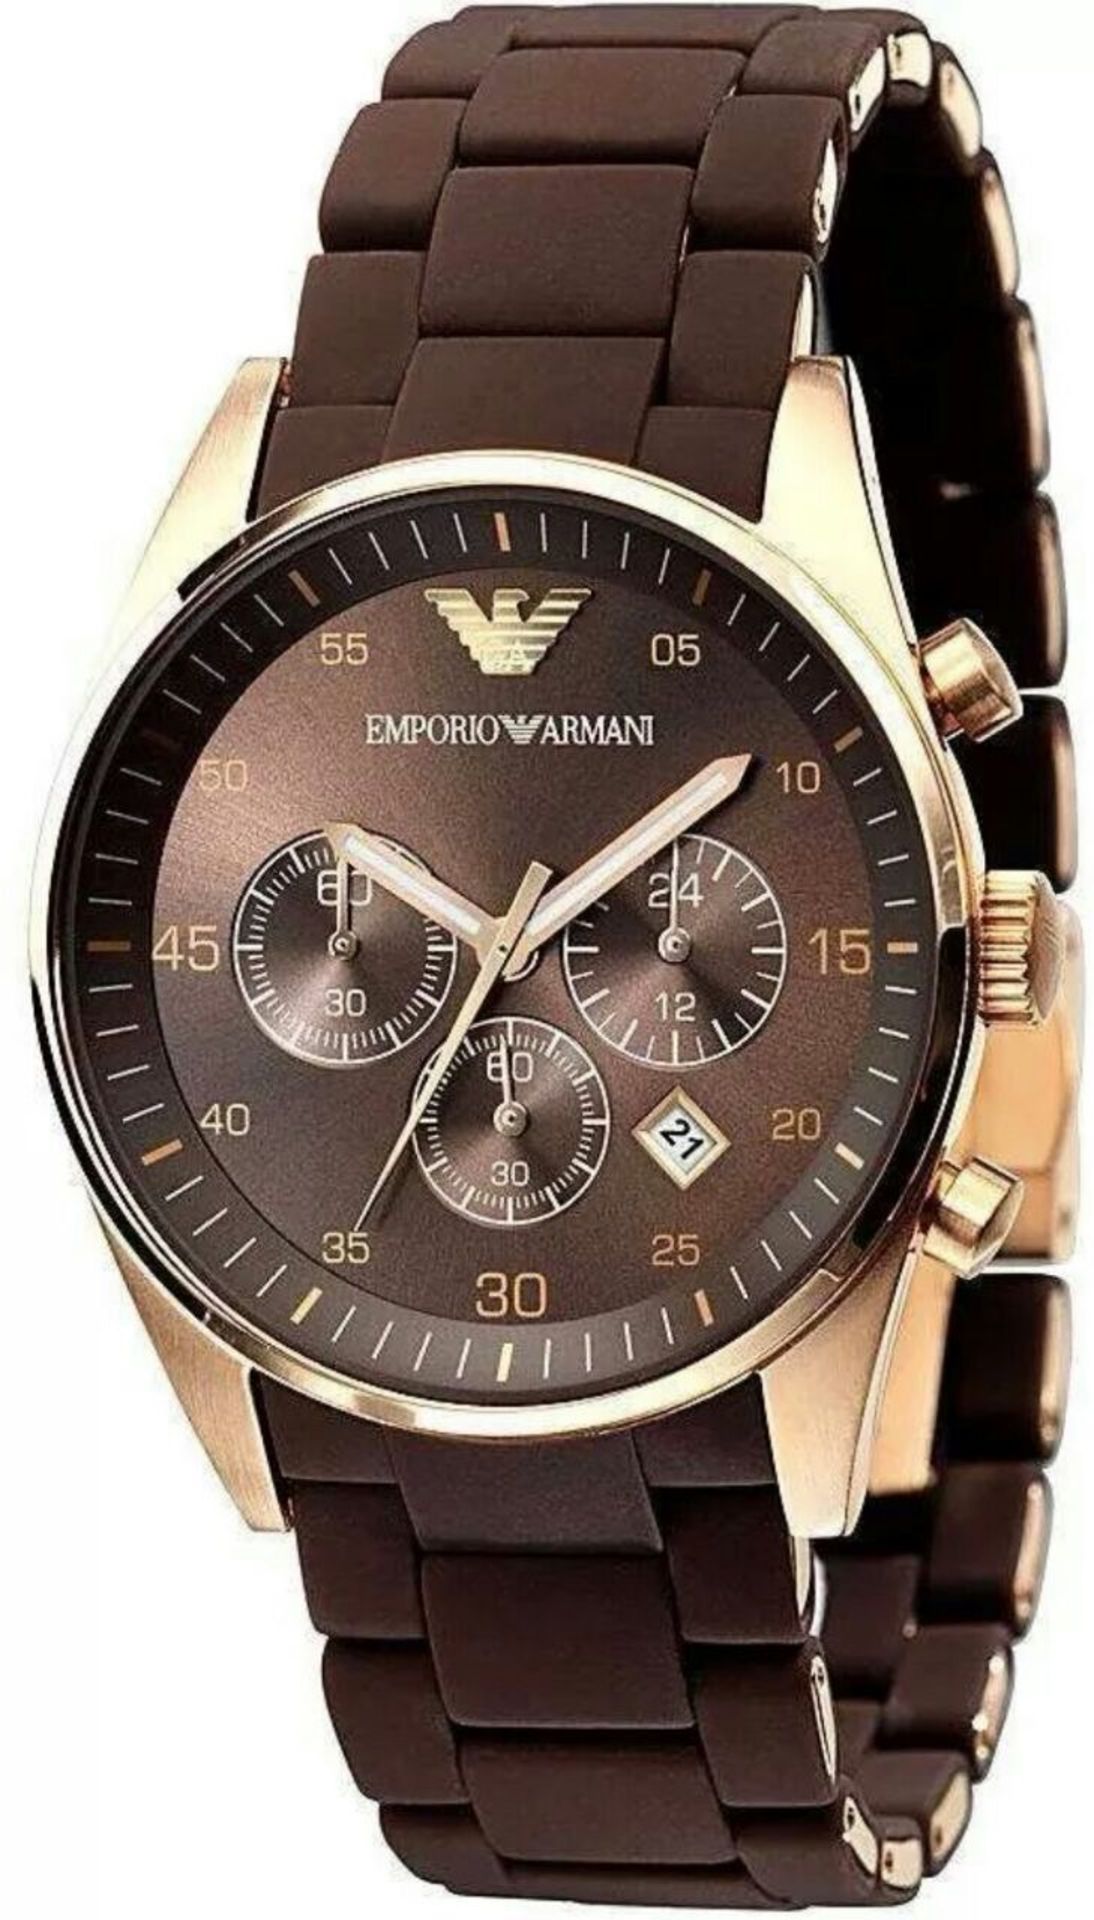 BRAND NEW EMPORIO ARMANI AR5890, GENTS SPORTIVO CHRONOGRAPH WATCH, WITH A BROWN SILICONE OVER